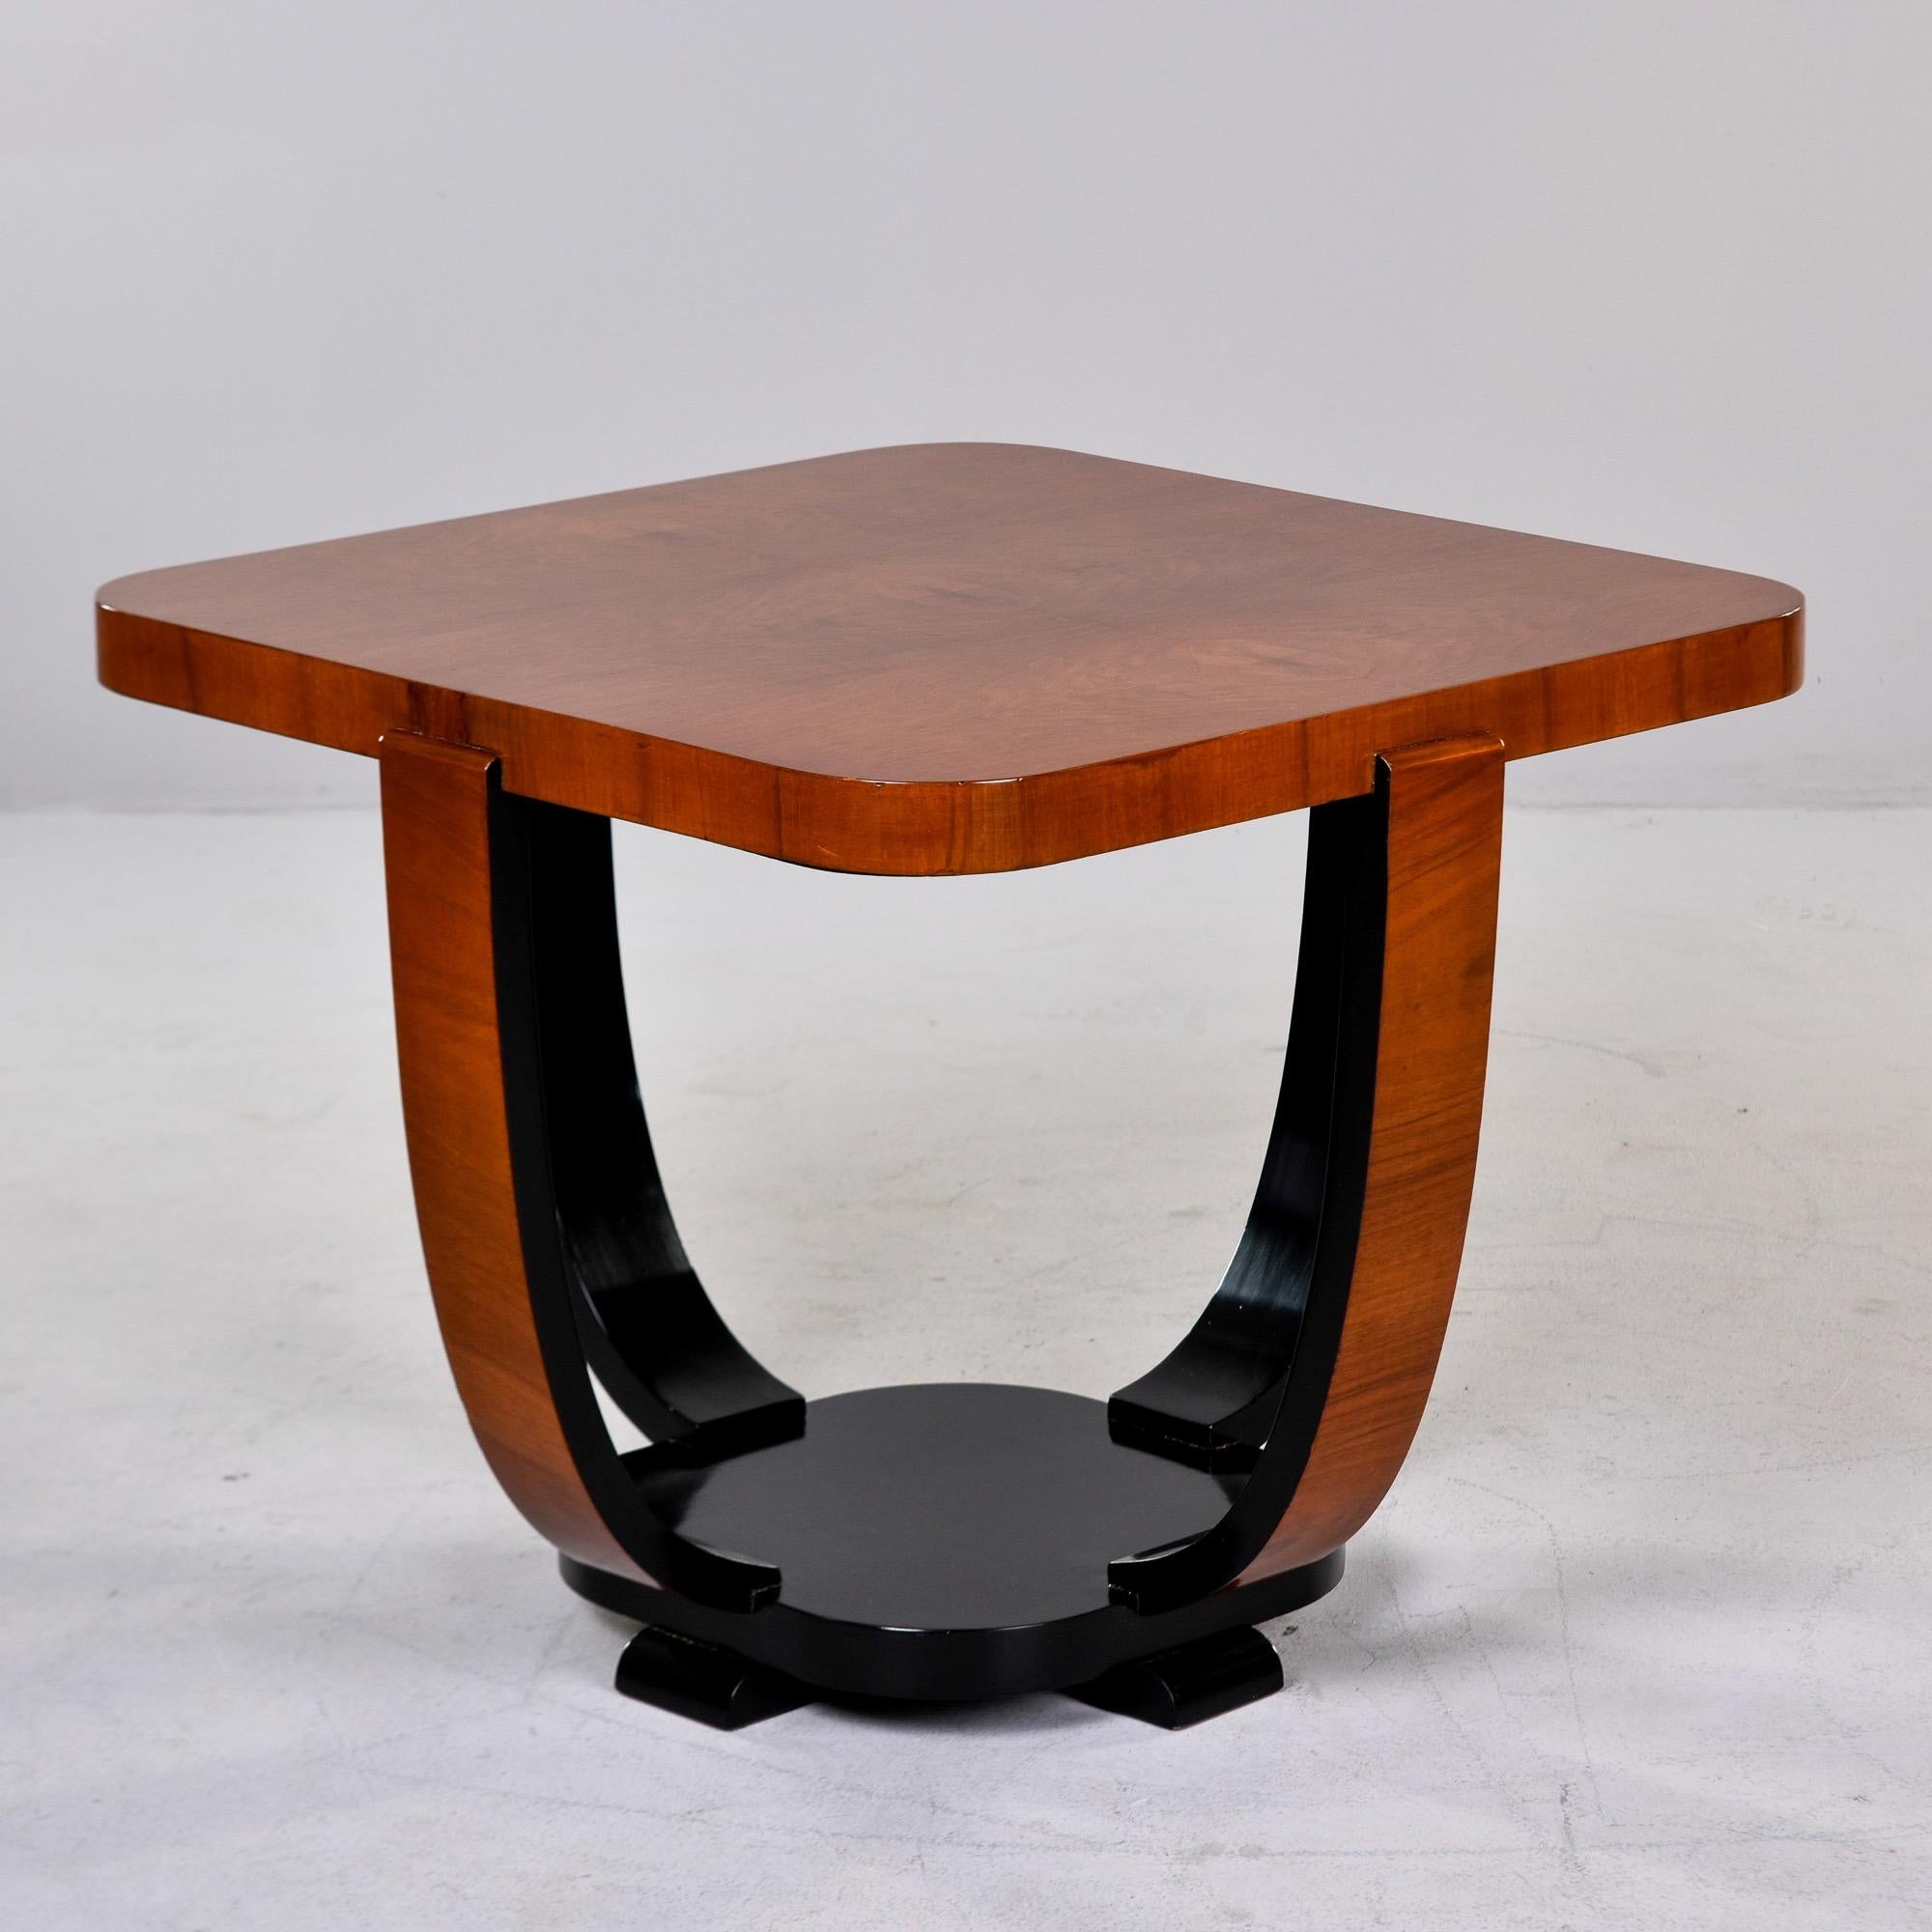 Found in France, this Art Deco side table dates from the 1930s. Square table top with rounded corners, four curved legs that connect to a round, footed base. Contrasting black finish on base and back sides of legs highlights the curves. Unknown